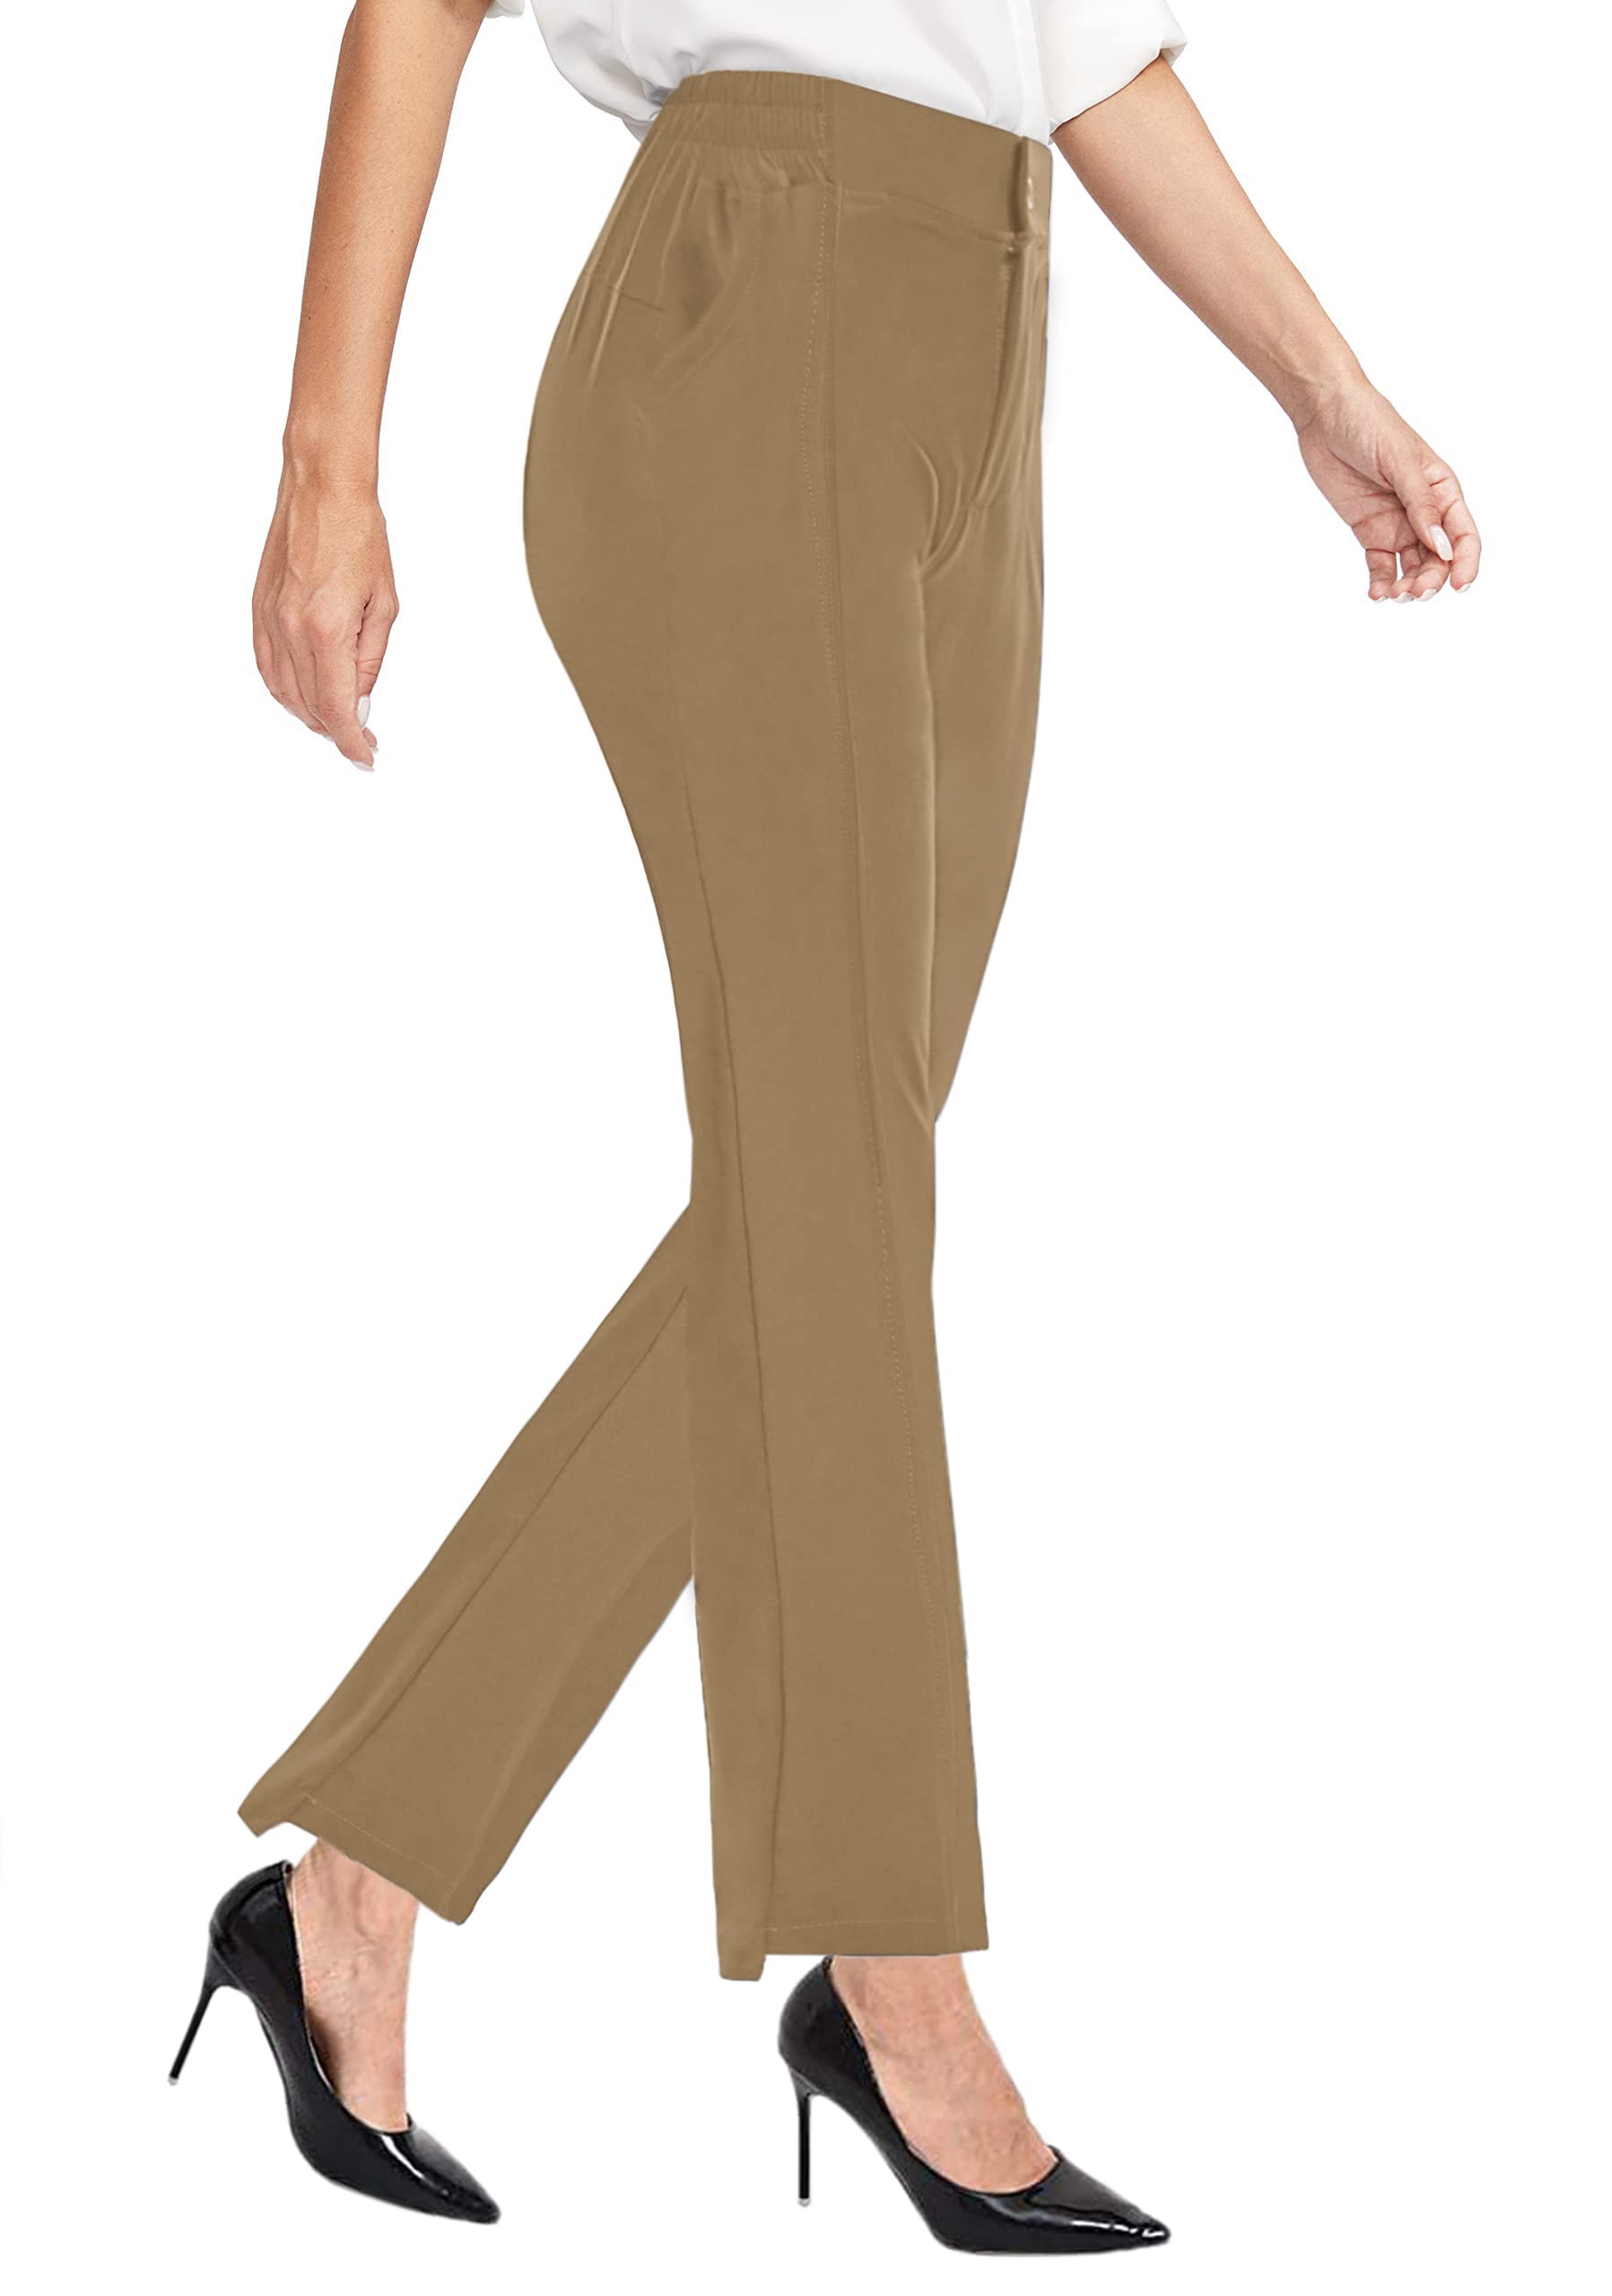 Women Pull On Solid Dress Pants Work With Pocket Stretch High Waist  Straight Leg